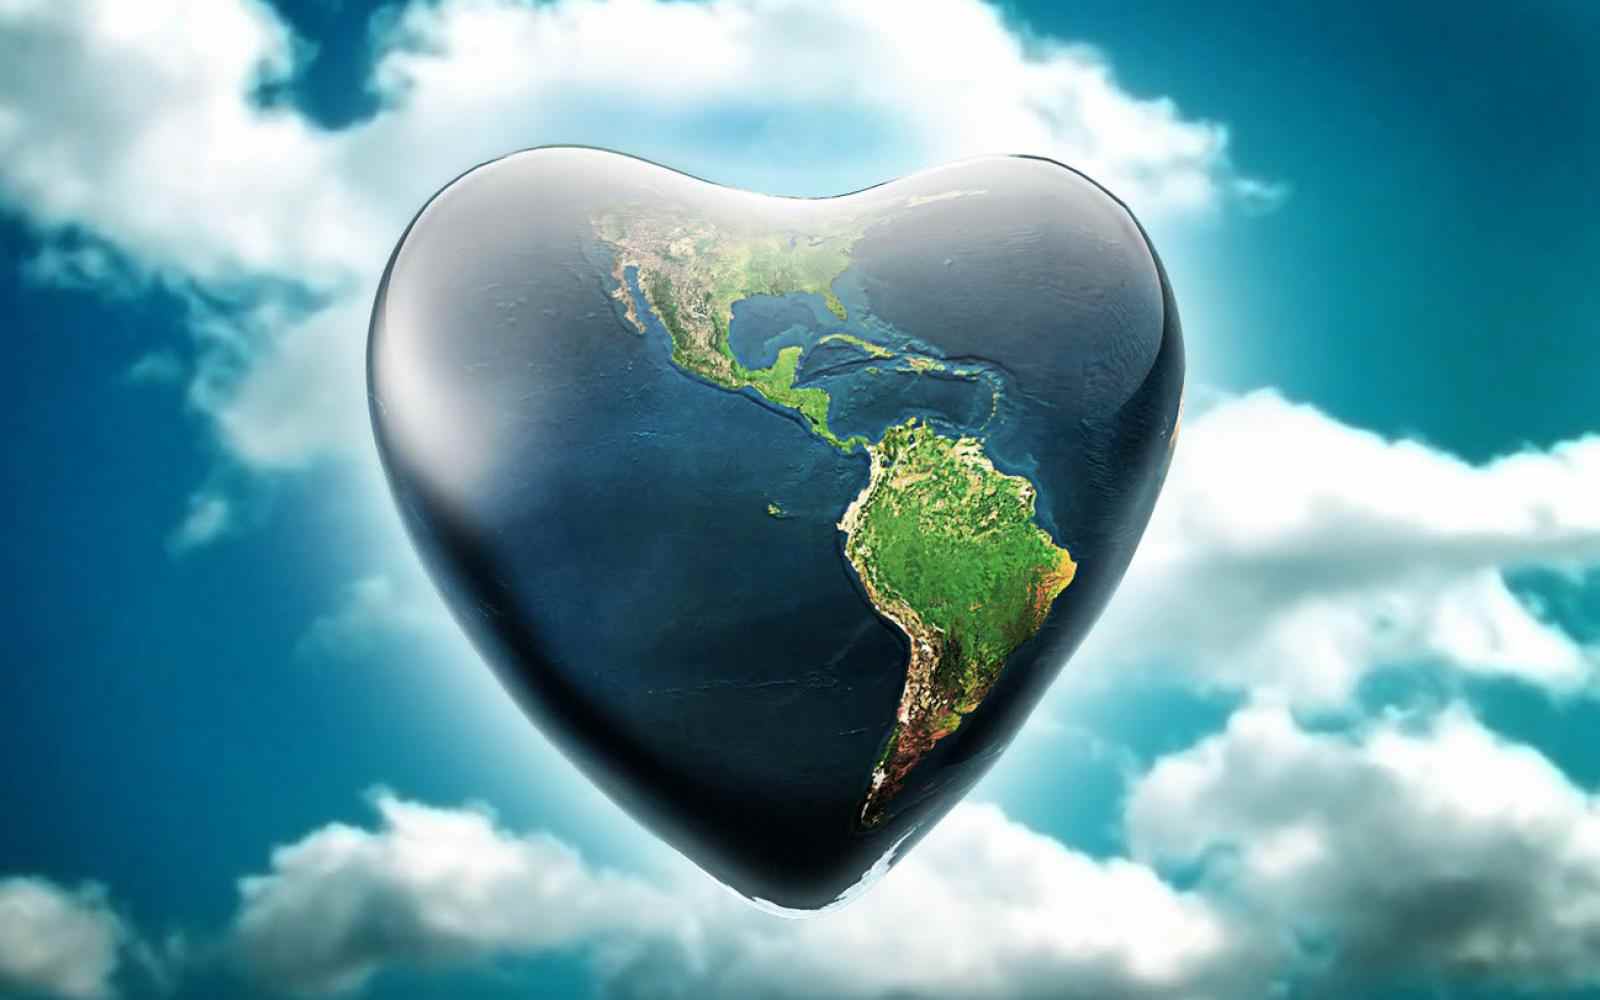 Heart Shaped Planet Earth render in front of clouds